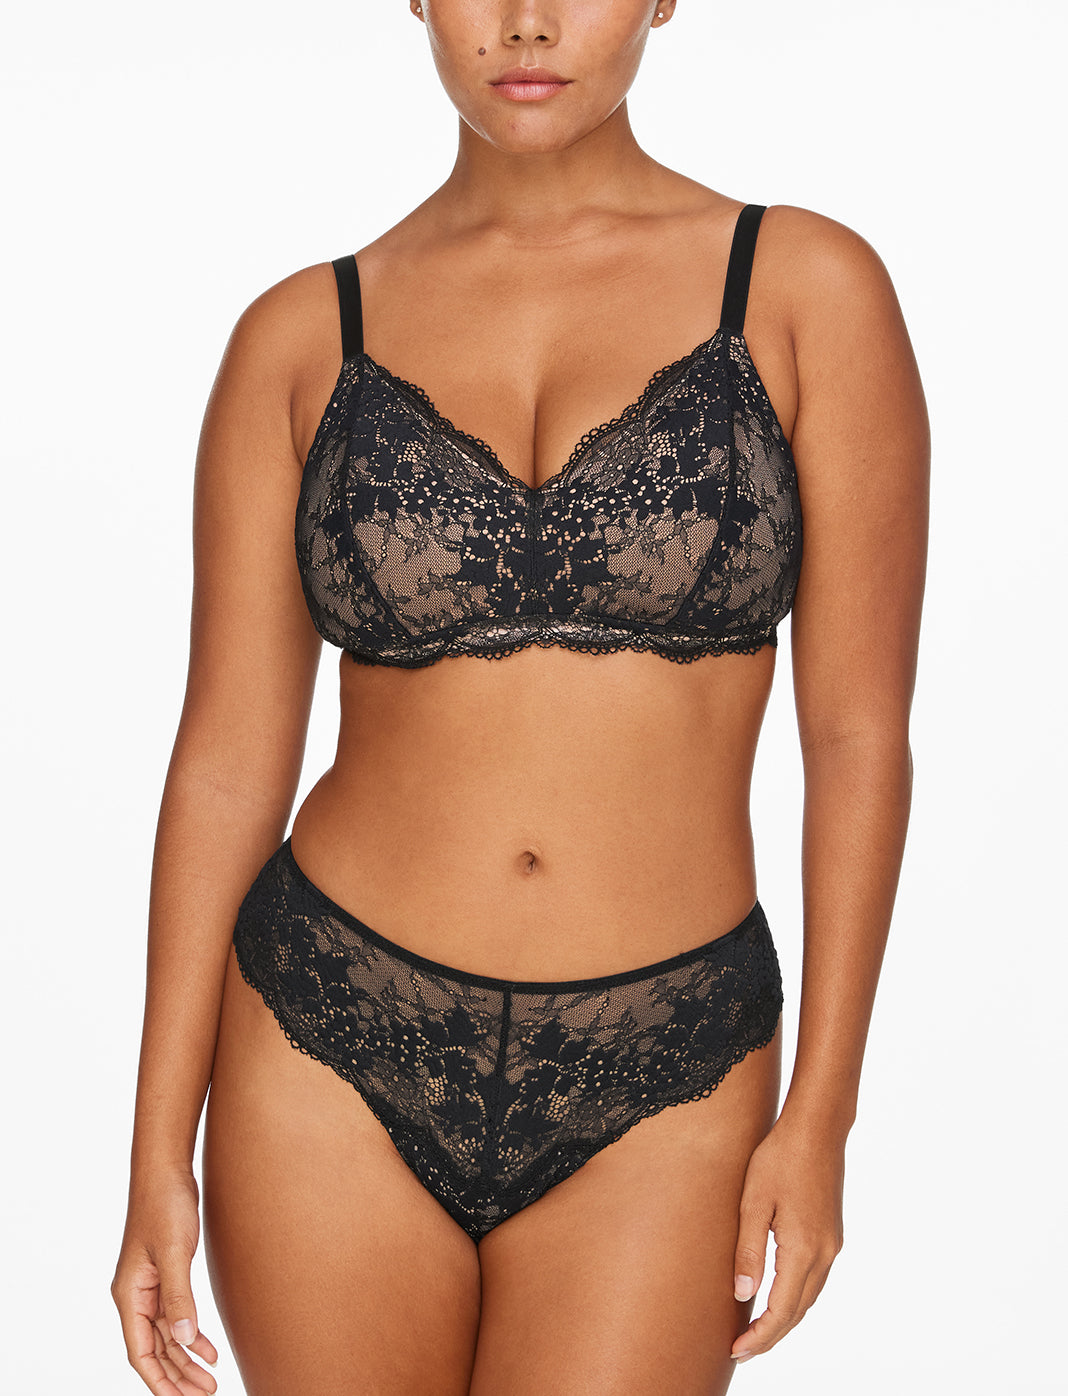 Buy Black Recycled Lace Full Cup Comfort Bra - 32F, Bras